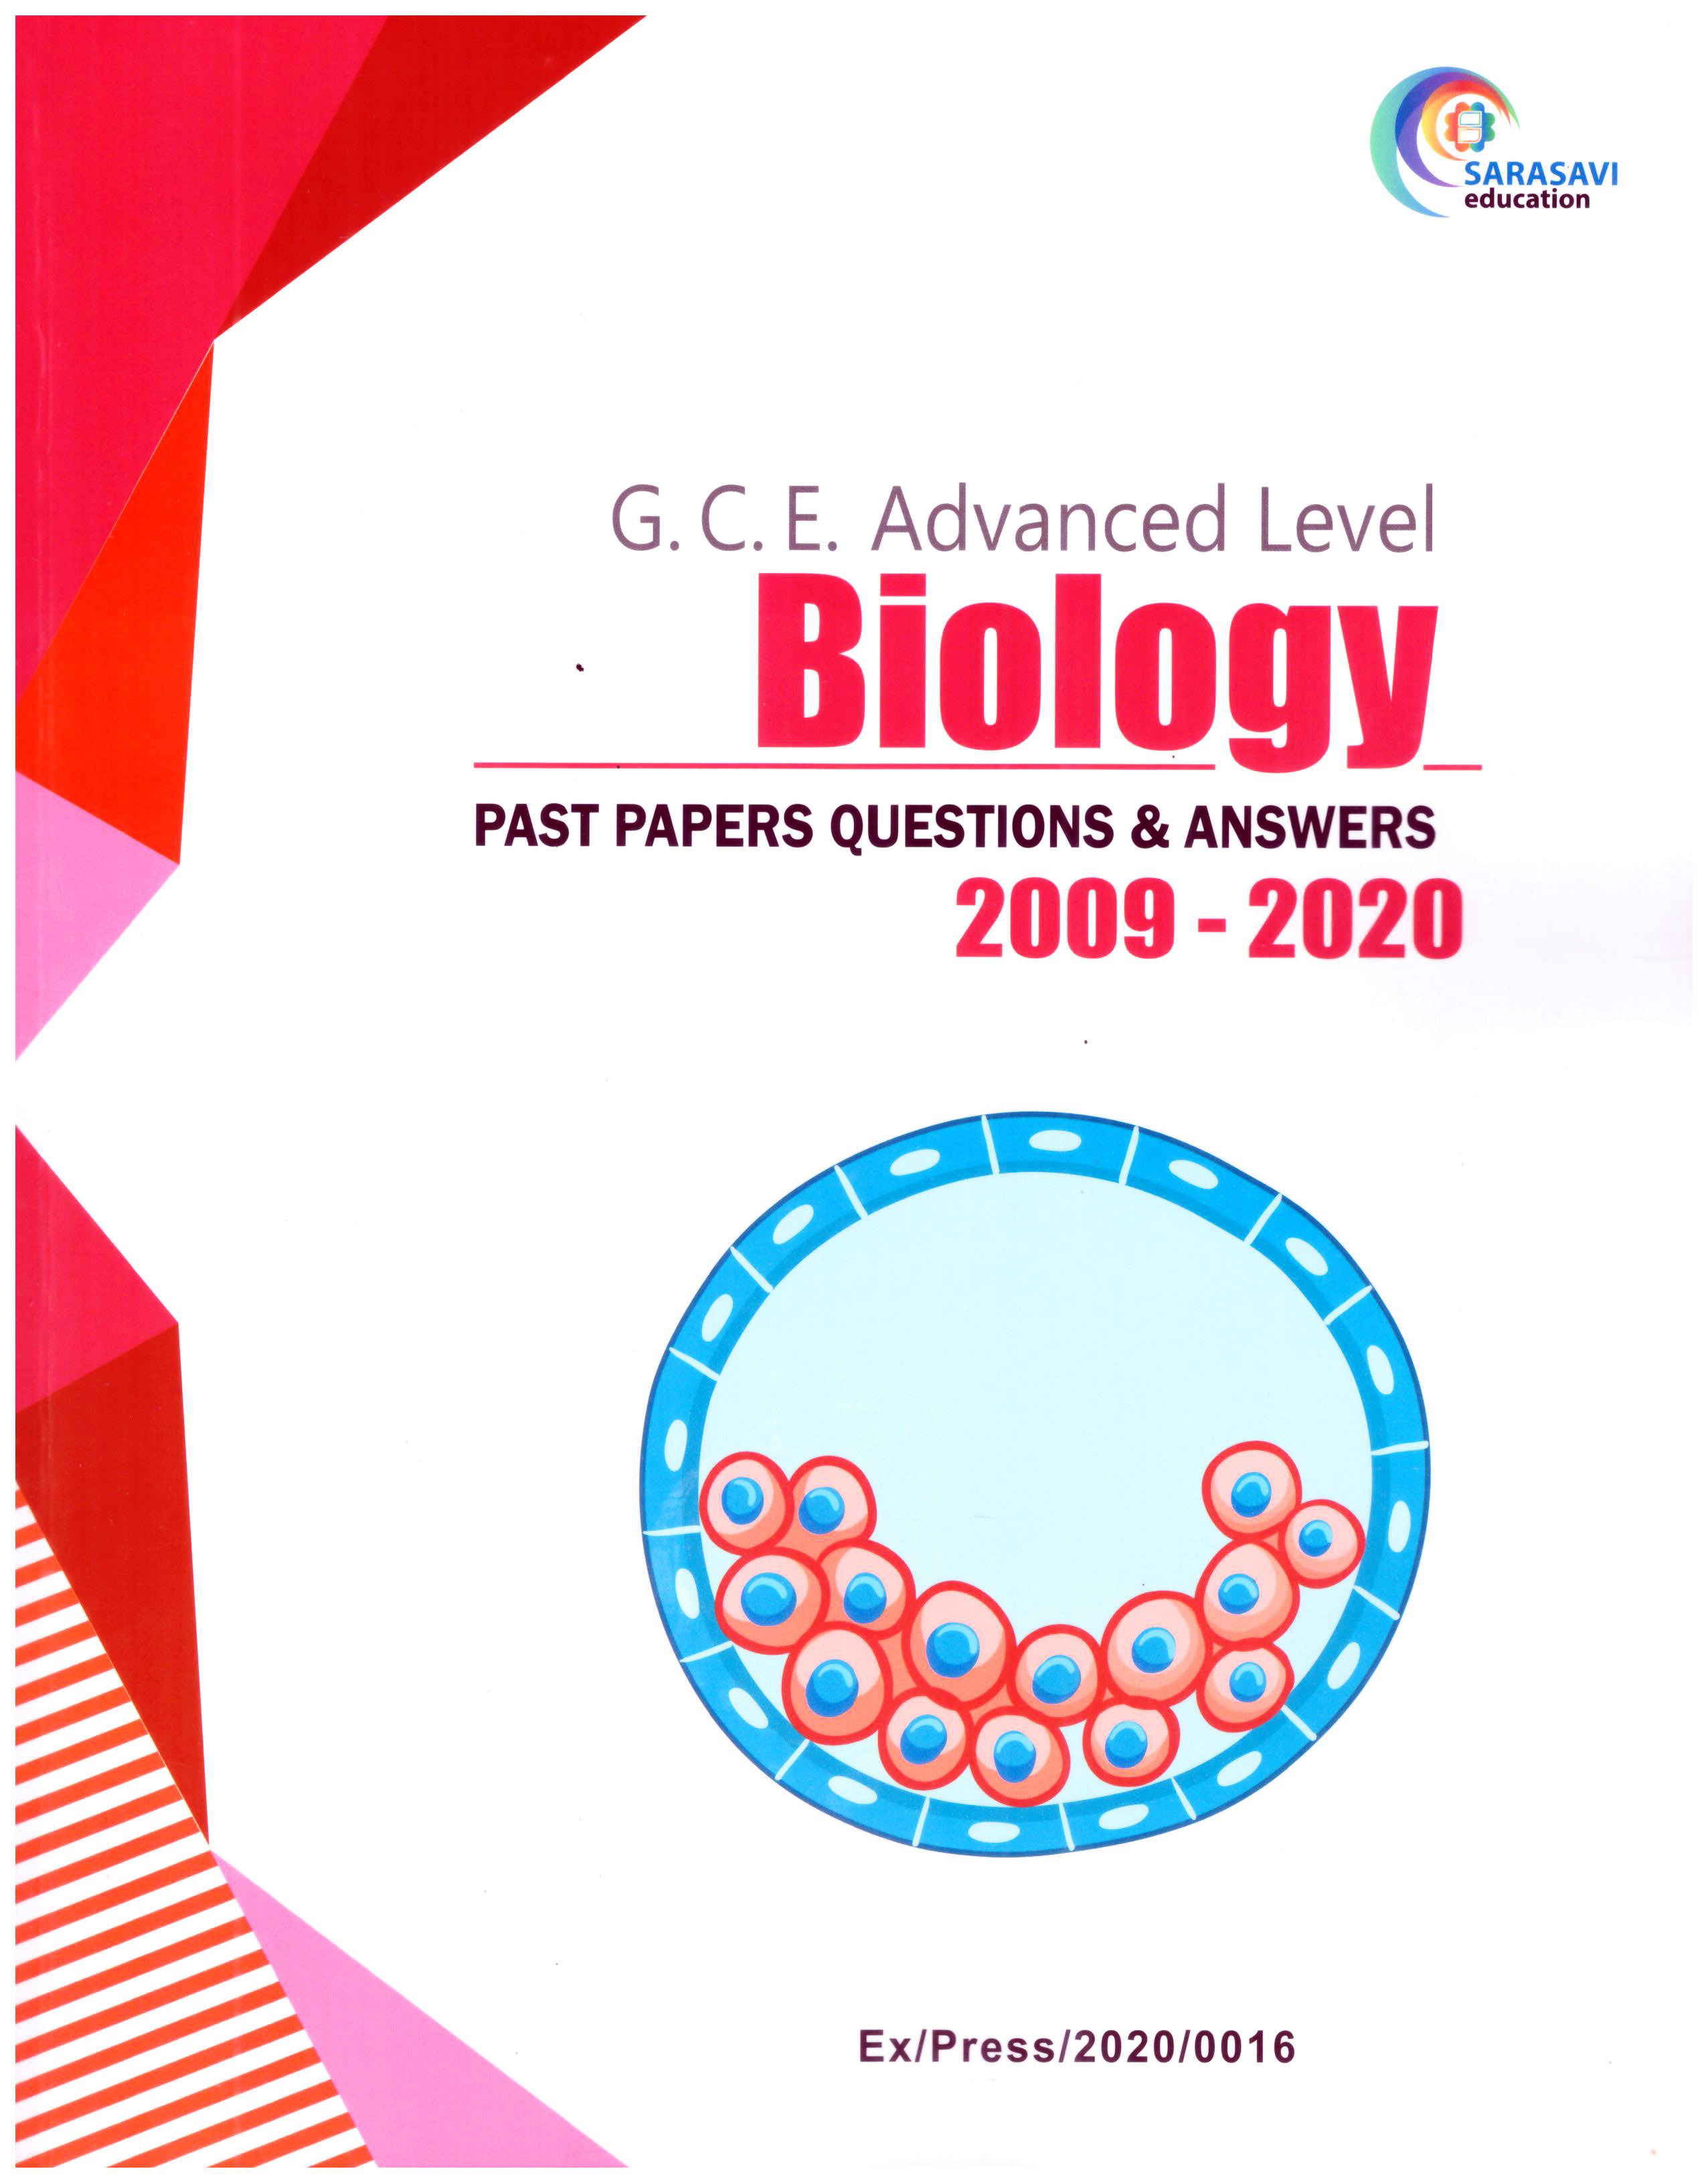 Sarasavi A/L Biology ( Past Papers Questions and Answers 2009 - 2020 )